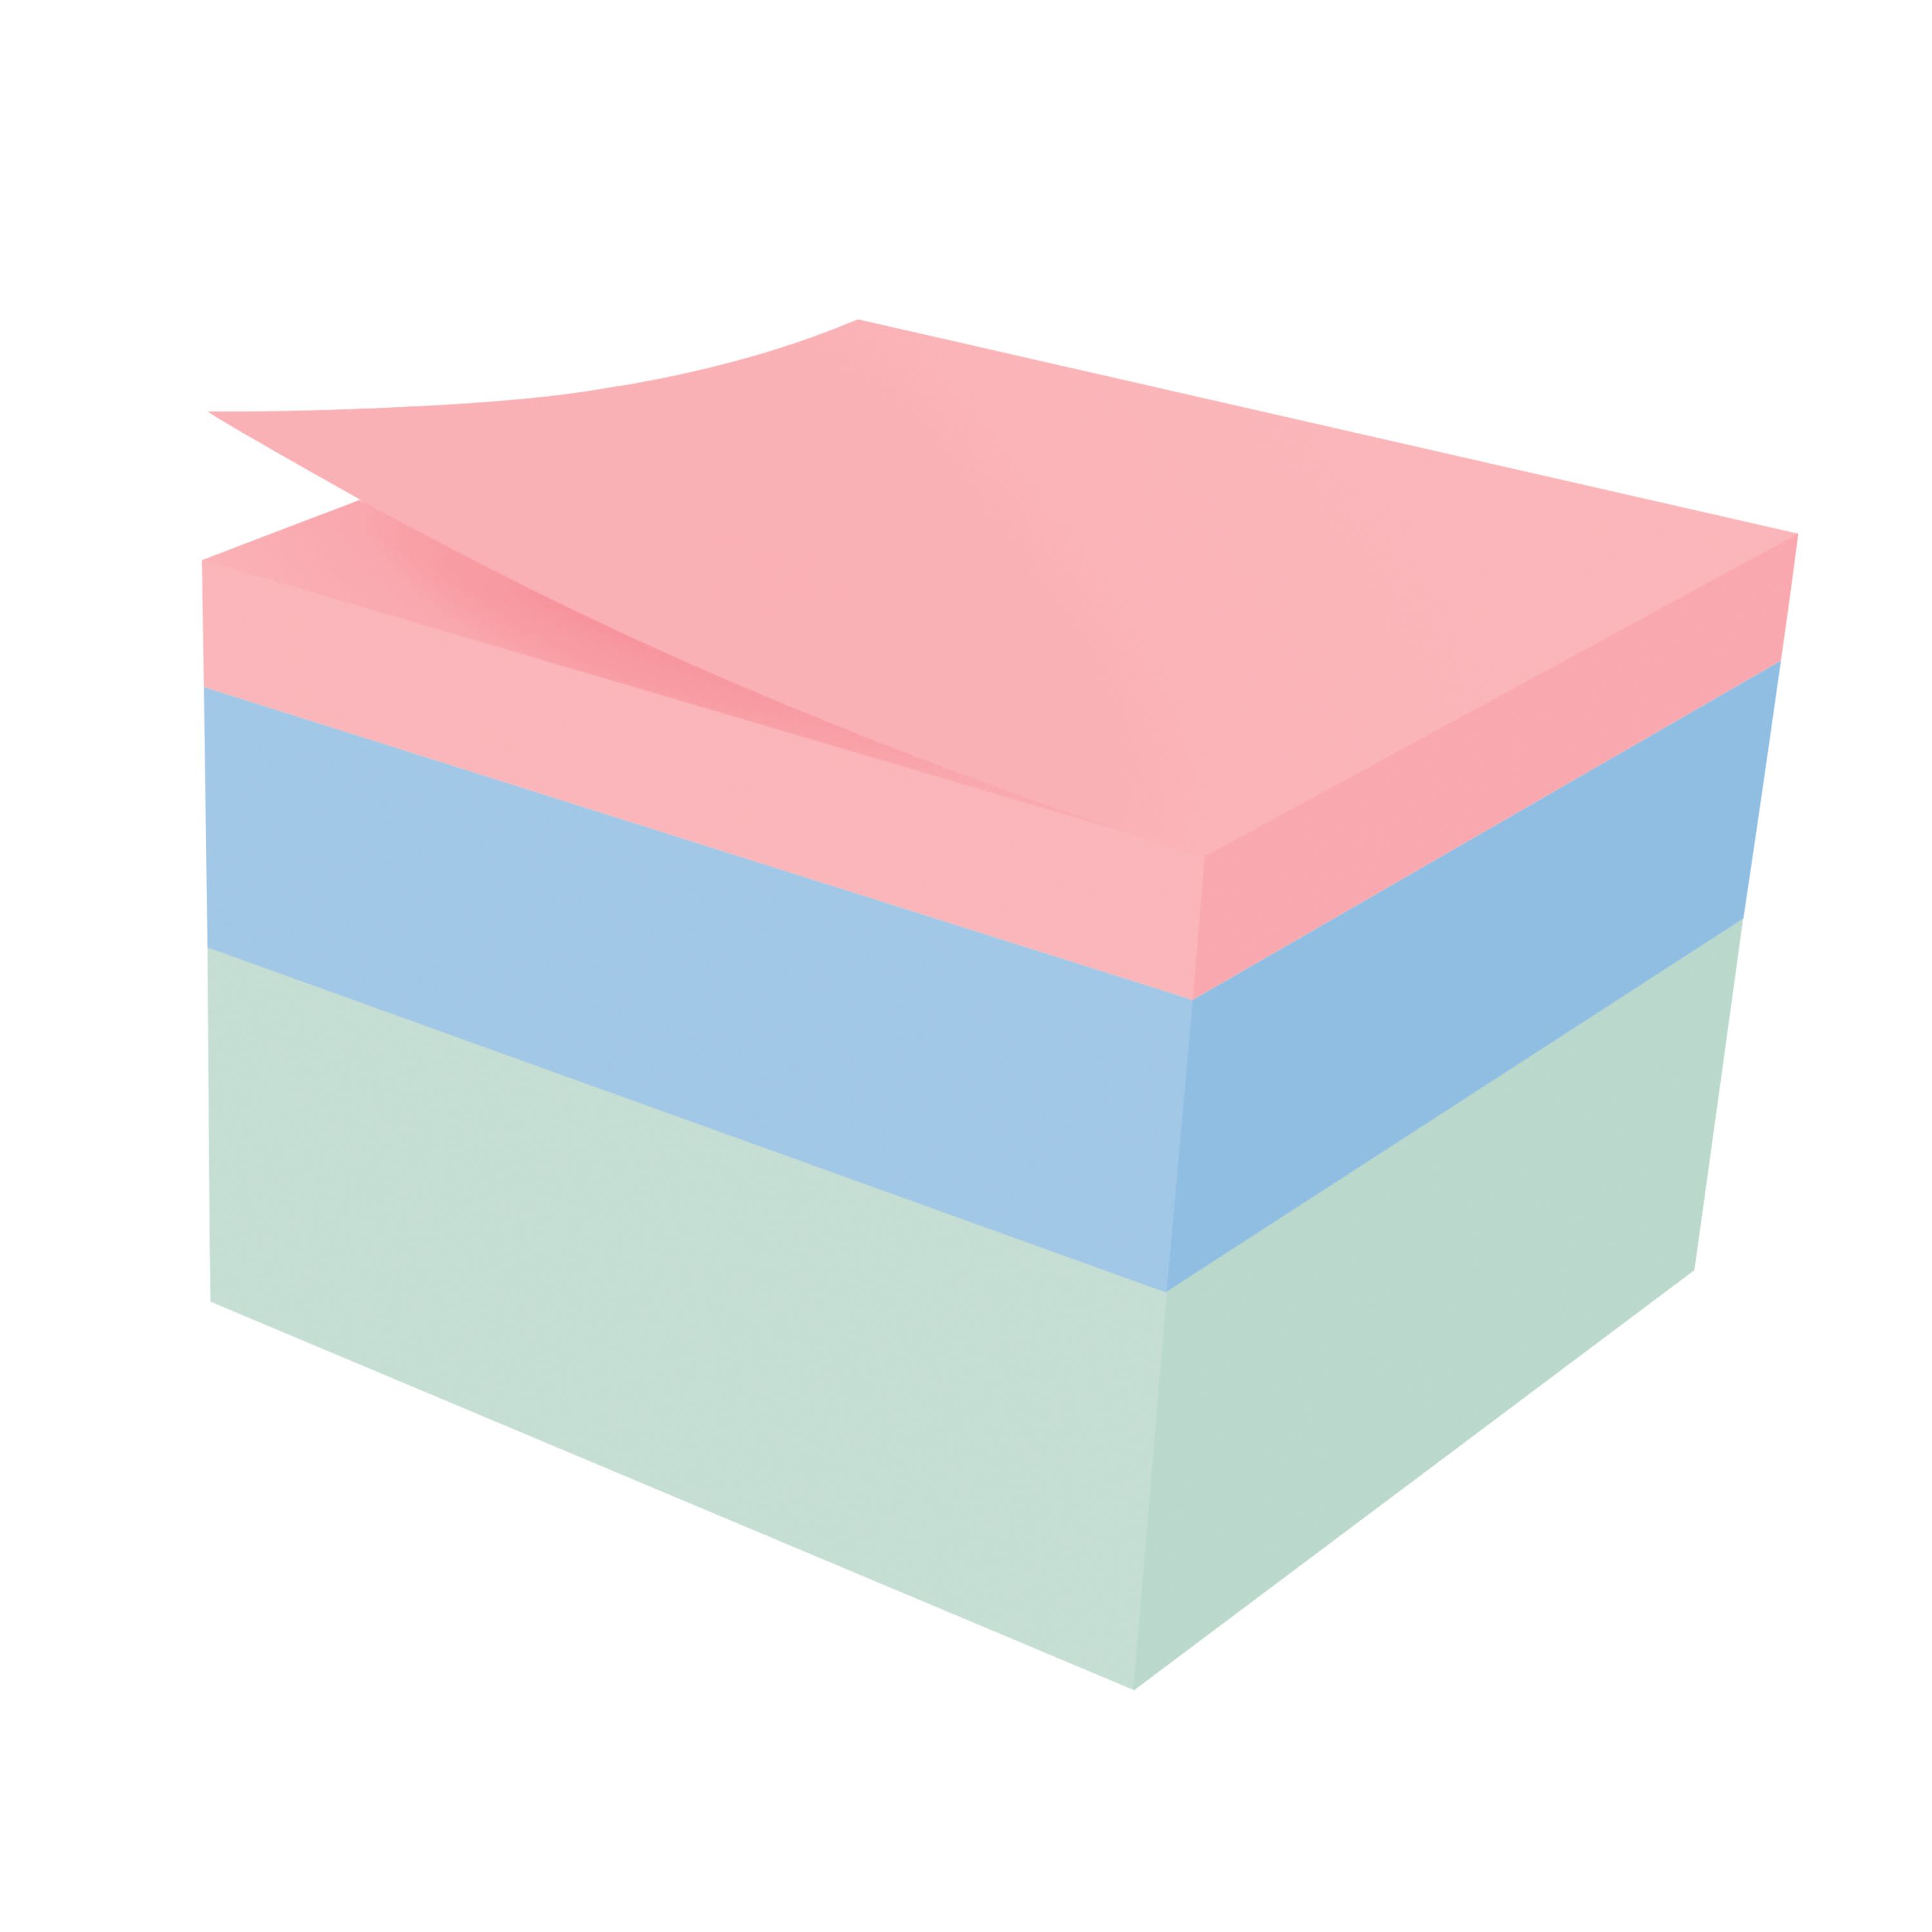 Post-it® Notes Cube, 3 in x 3 in, 490 sheets - image 3 of 9